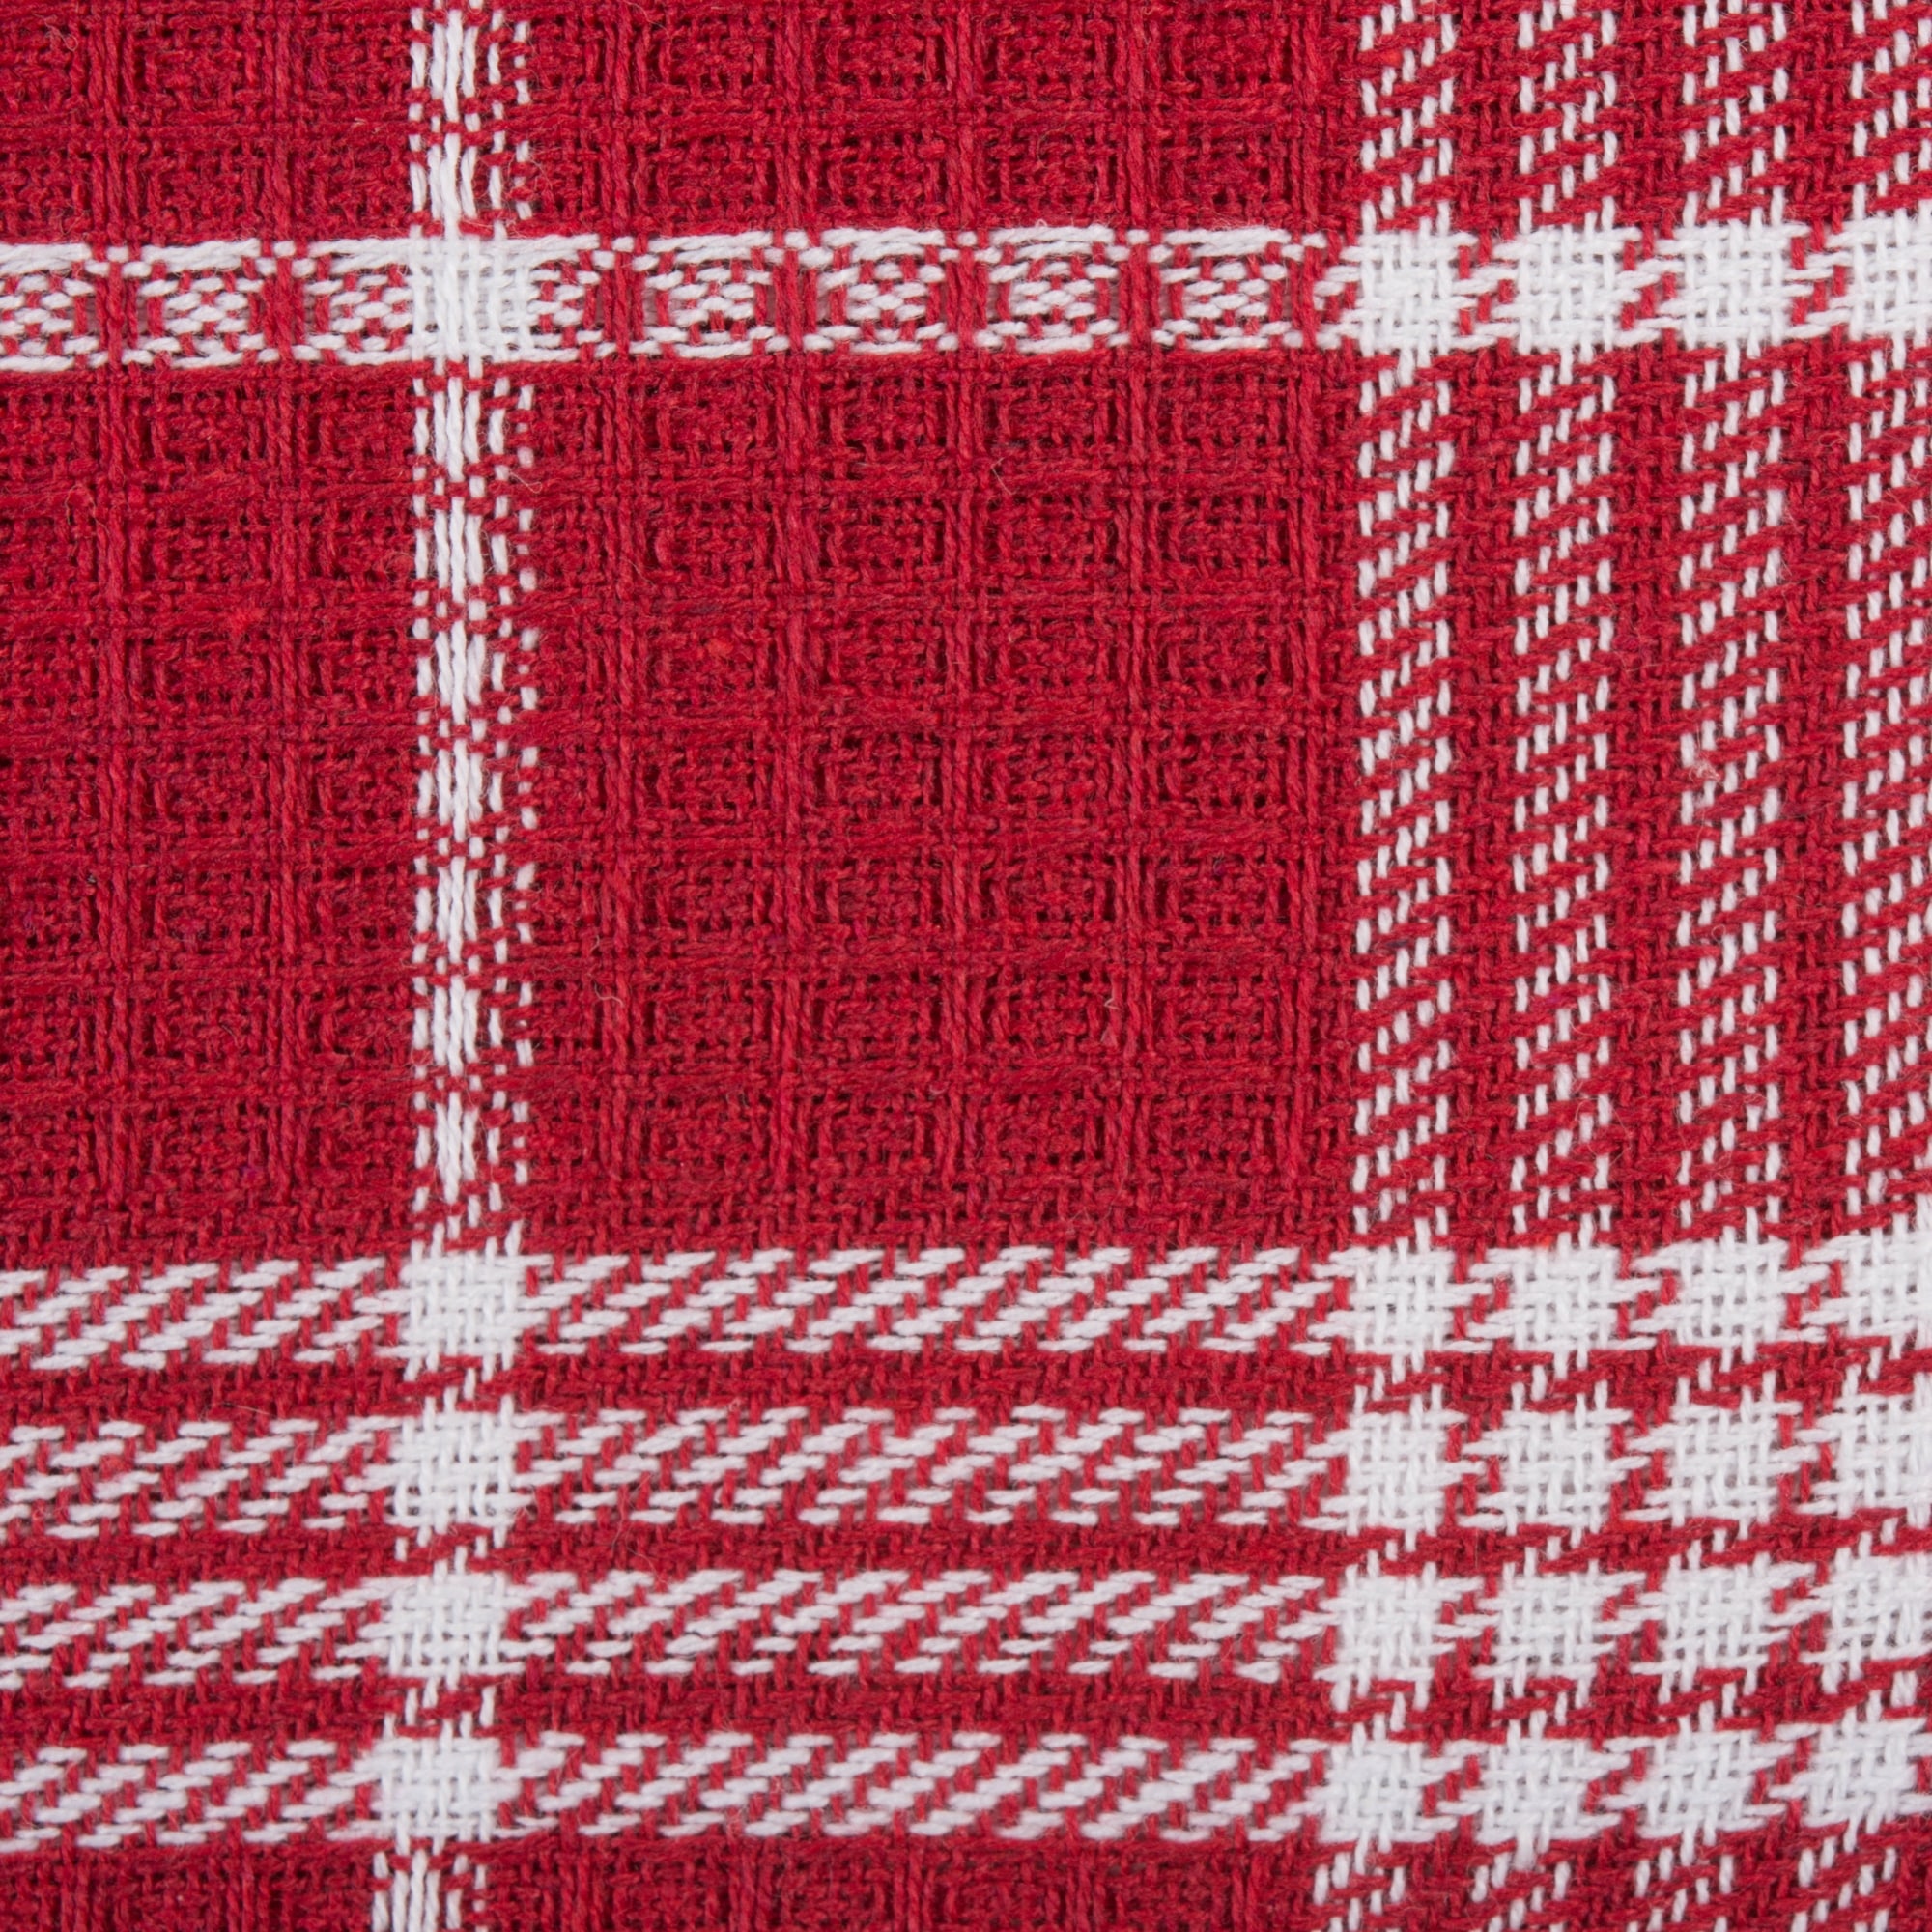 https://ak1.ostkcdn.com/images/products/is/images/direct/97f46329c639b8f344233bd57b5a171a9f16bc35/J%26M-Red-Waffle-Weave-Dishcloth-%28Set-of-12%29.jpg